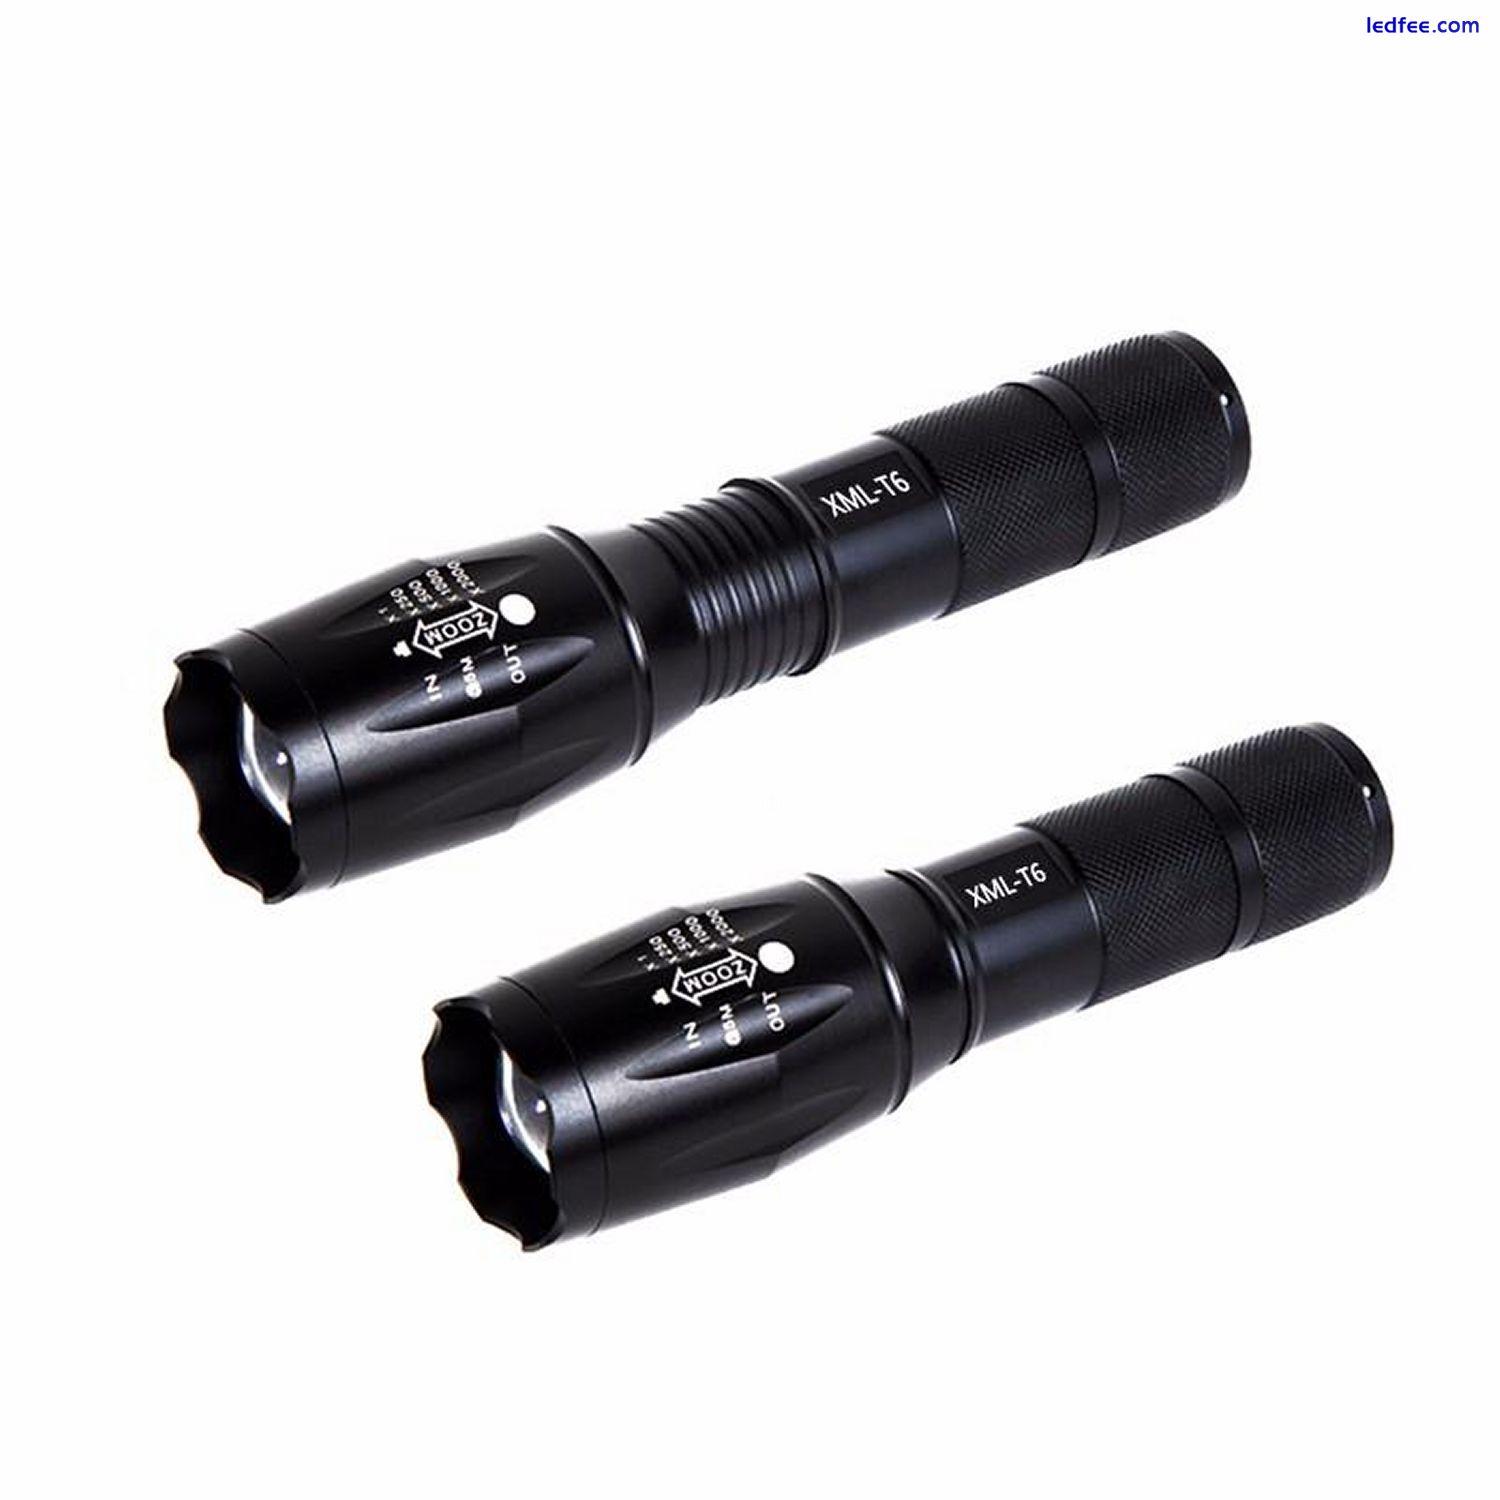 LED Torch Flashlight Police Military Bright High Power Waterproof, Zoom Tactical 2 